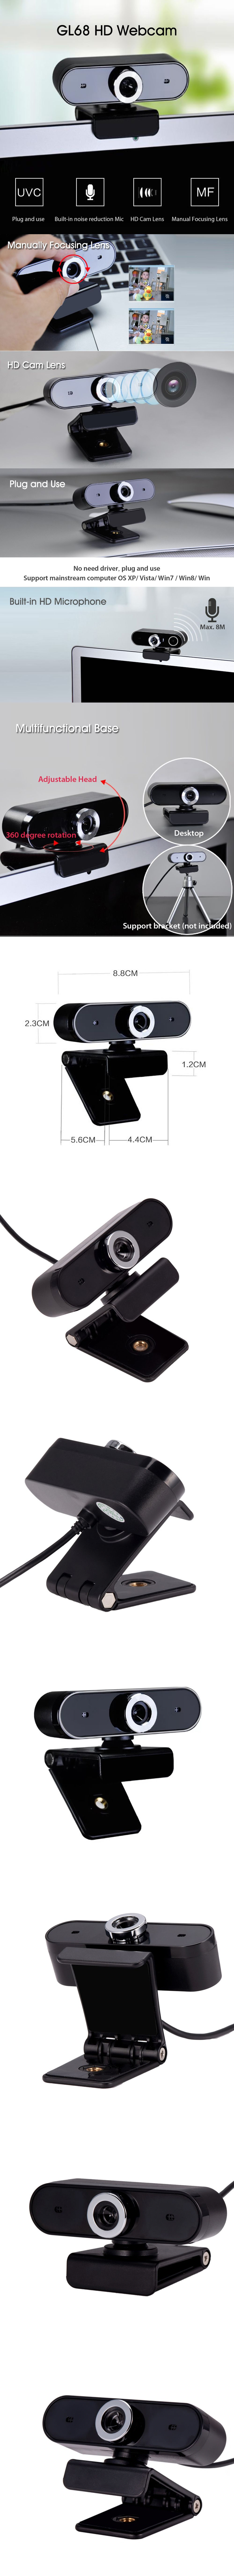 GL68-HD-Webcam-Video-Chat-Recording-USB-Camera-Web-Camera-With-HD-Mic-for-Computer-Desktop-Laptop-On-1660522